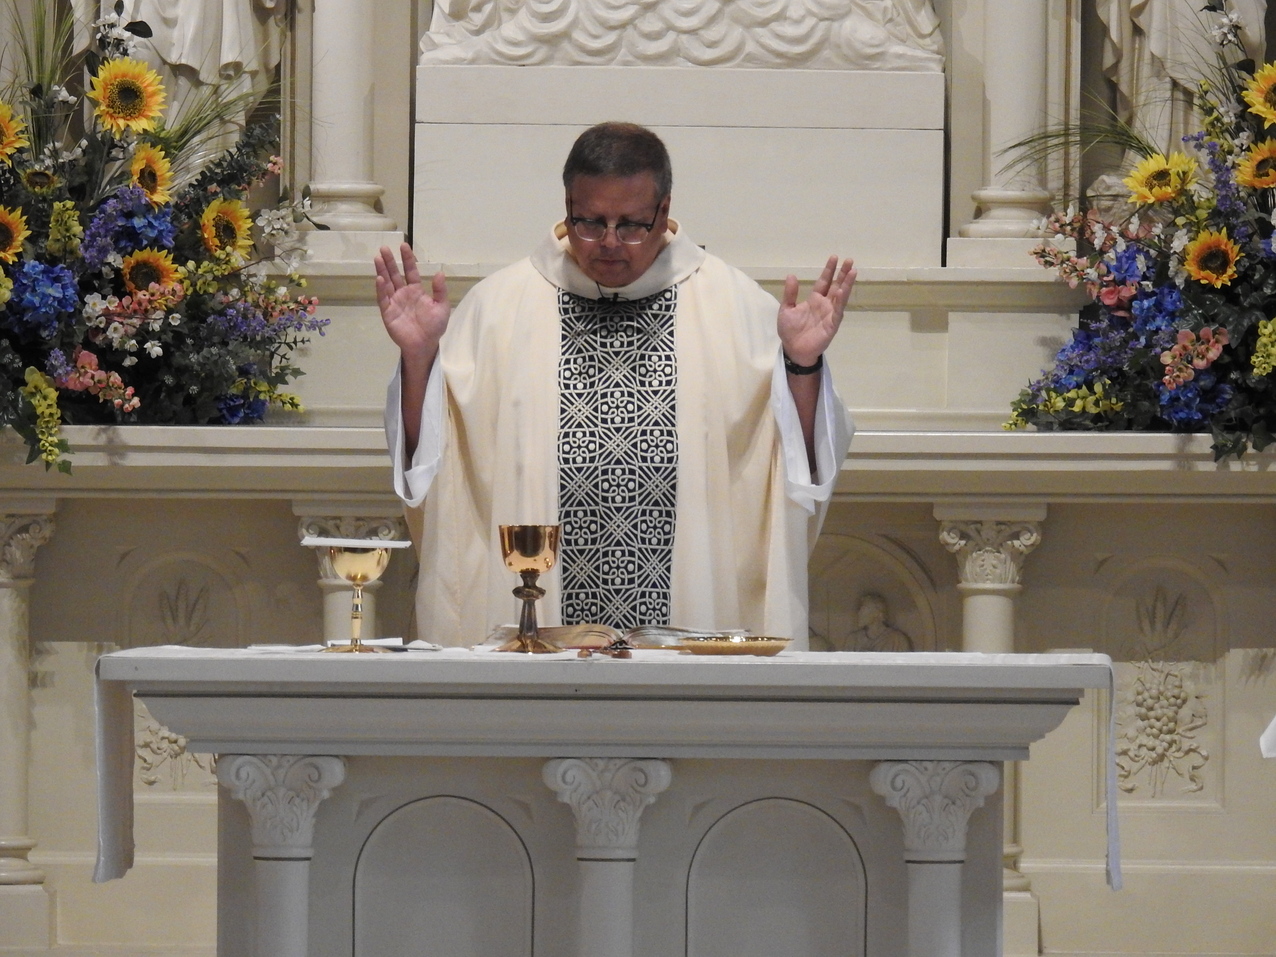 Hundreds view Holy Rosary Parish’s livestreamed Mass for feast of the Assumption